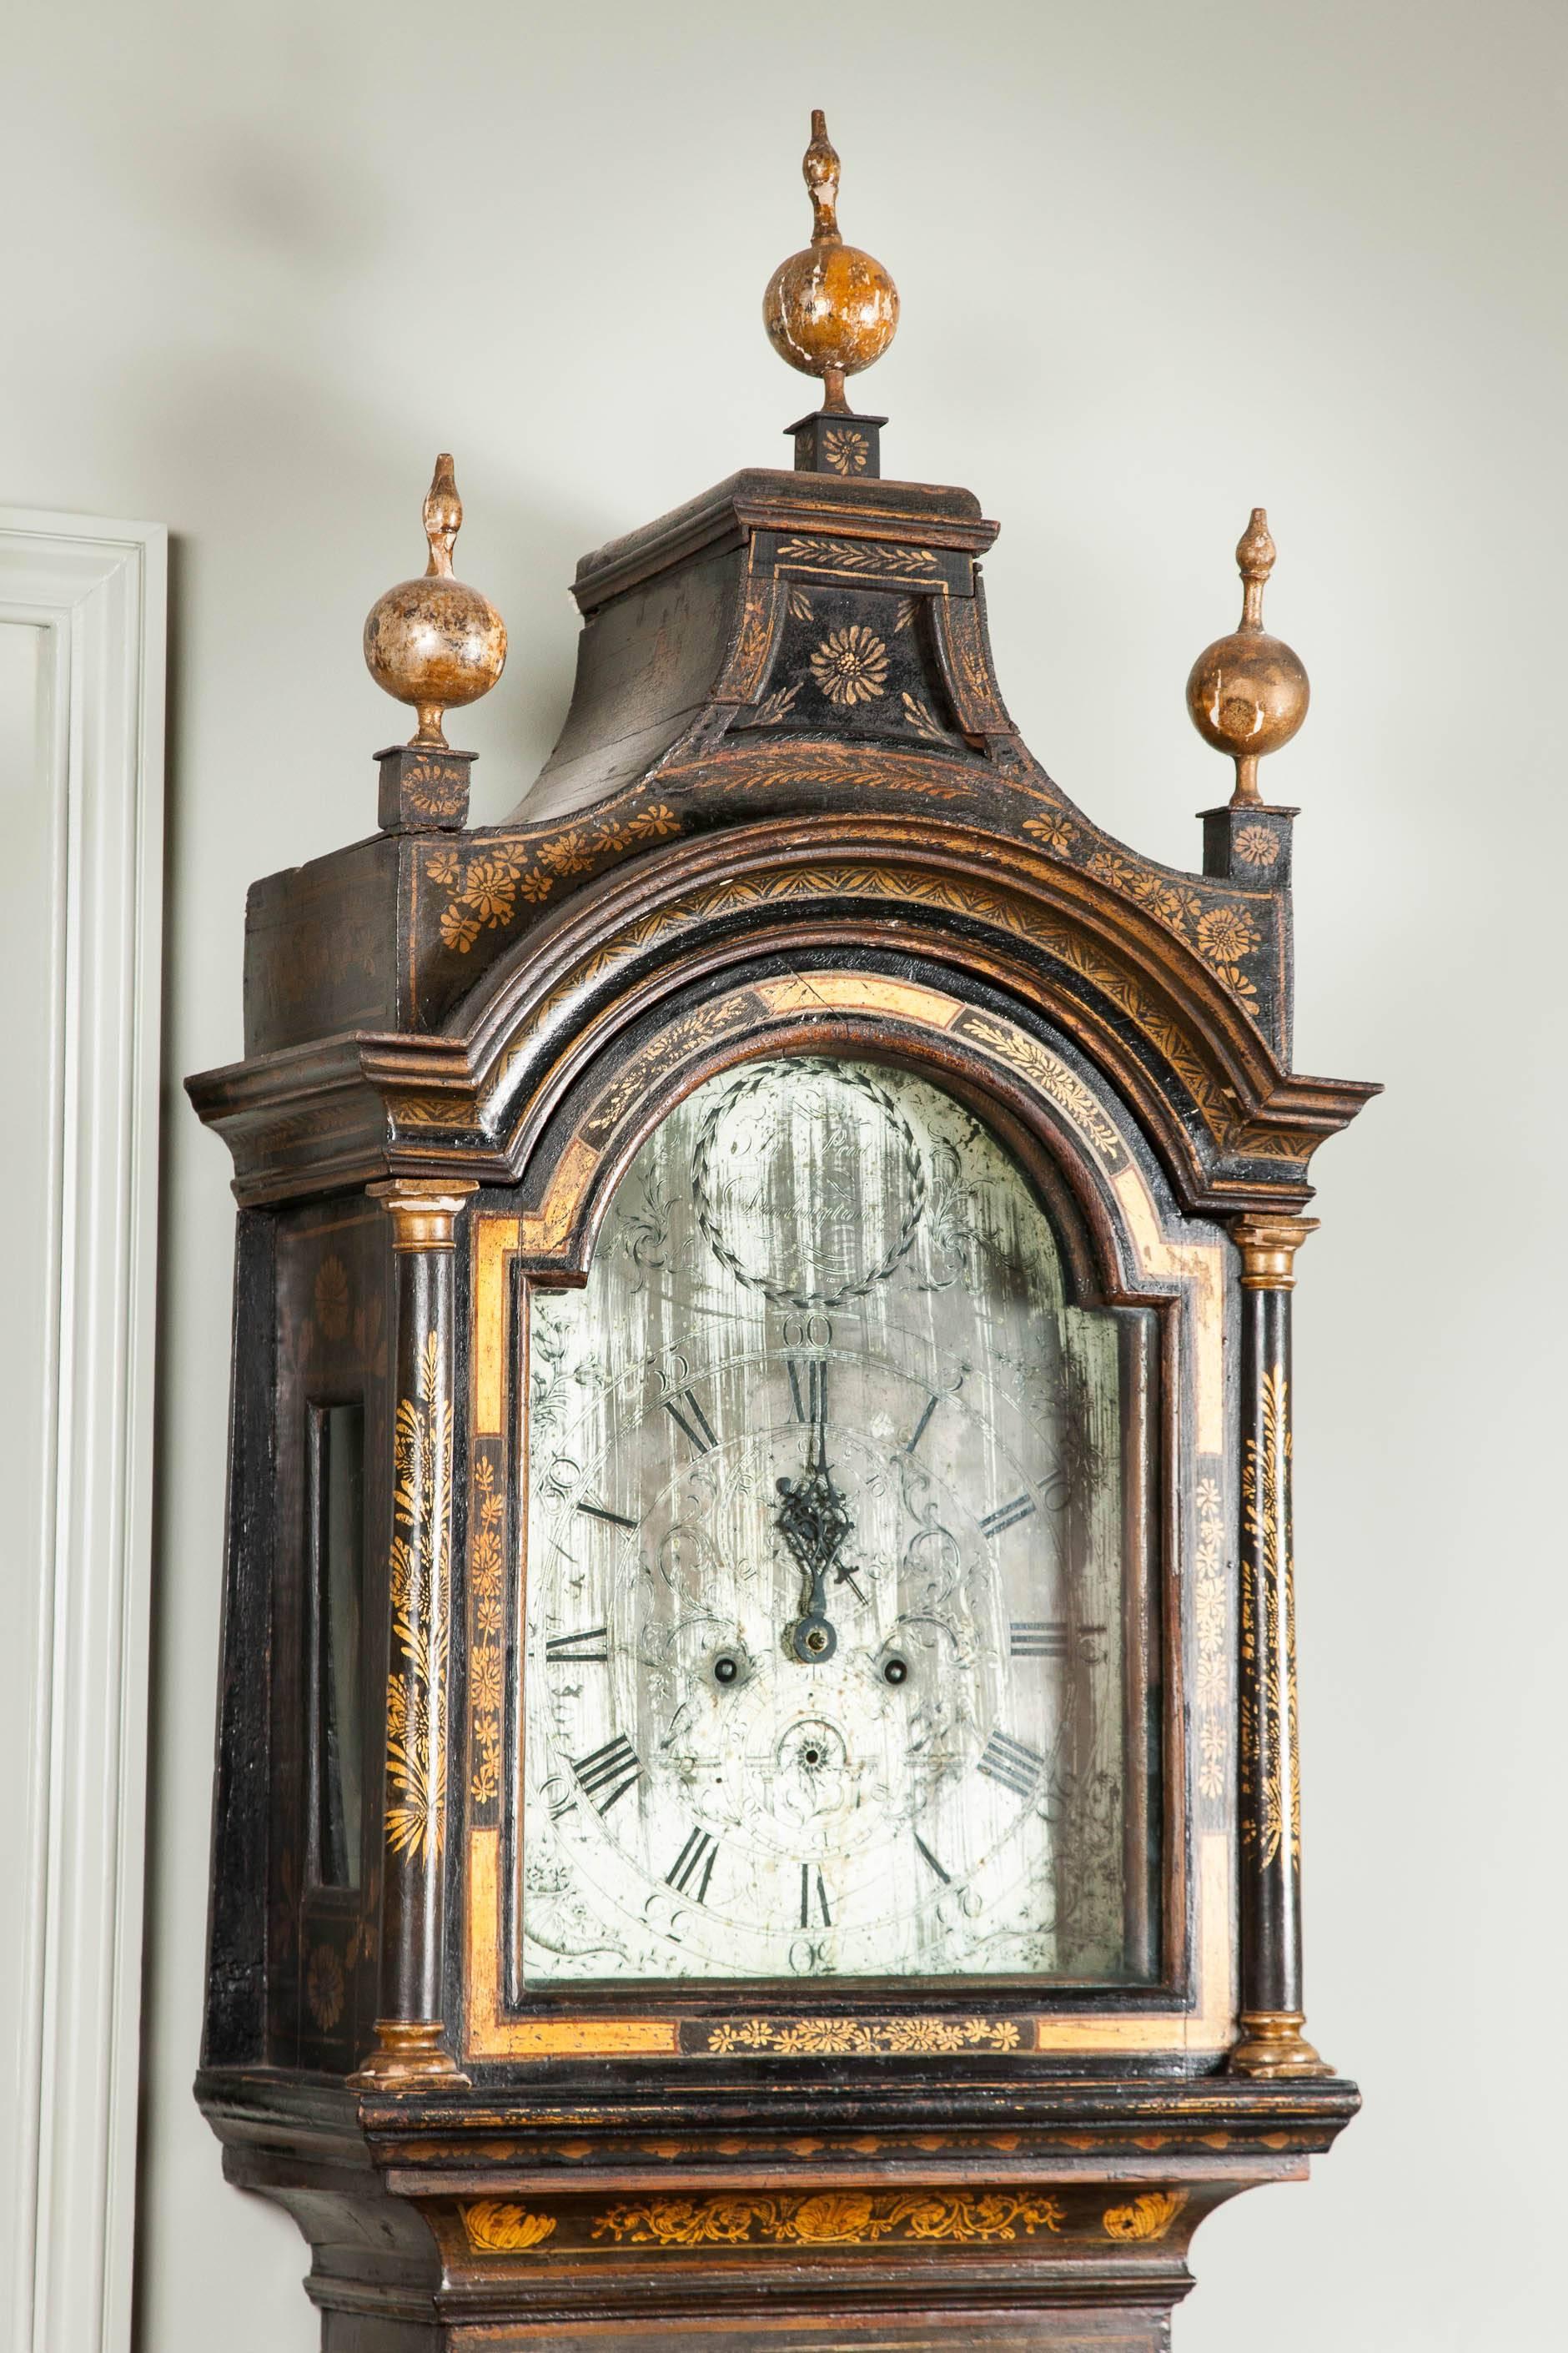 John Peat, Darlington: an 18th century green lacquer and Chinoiserie decorated longcase clock with pagoda hood above an arched silvered dial supporting twin train striking movement.